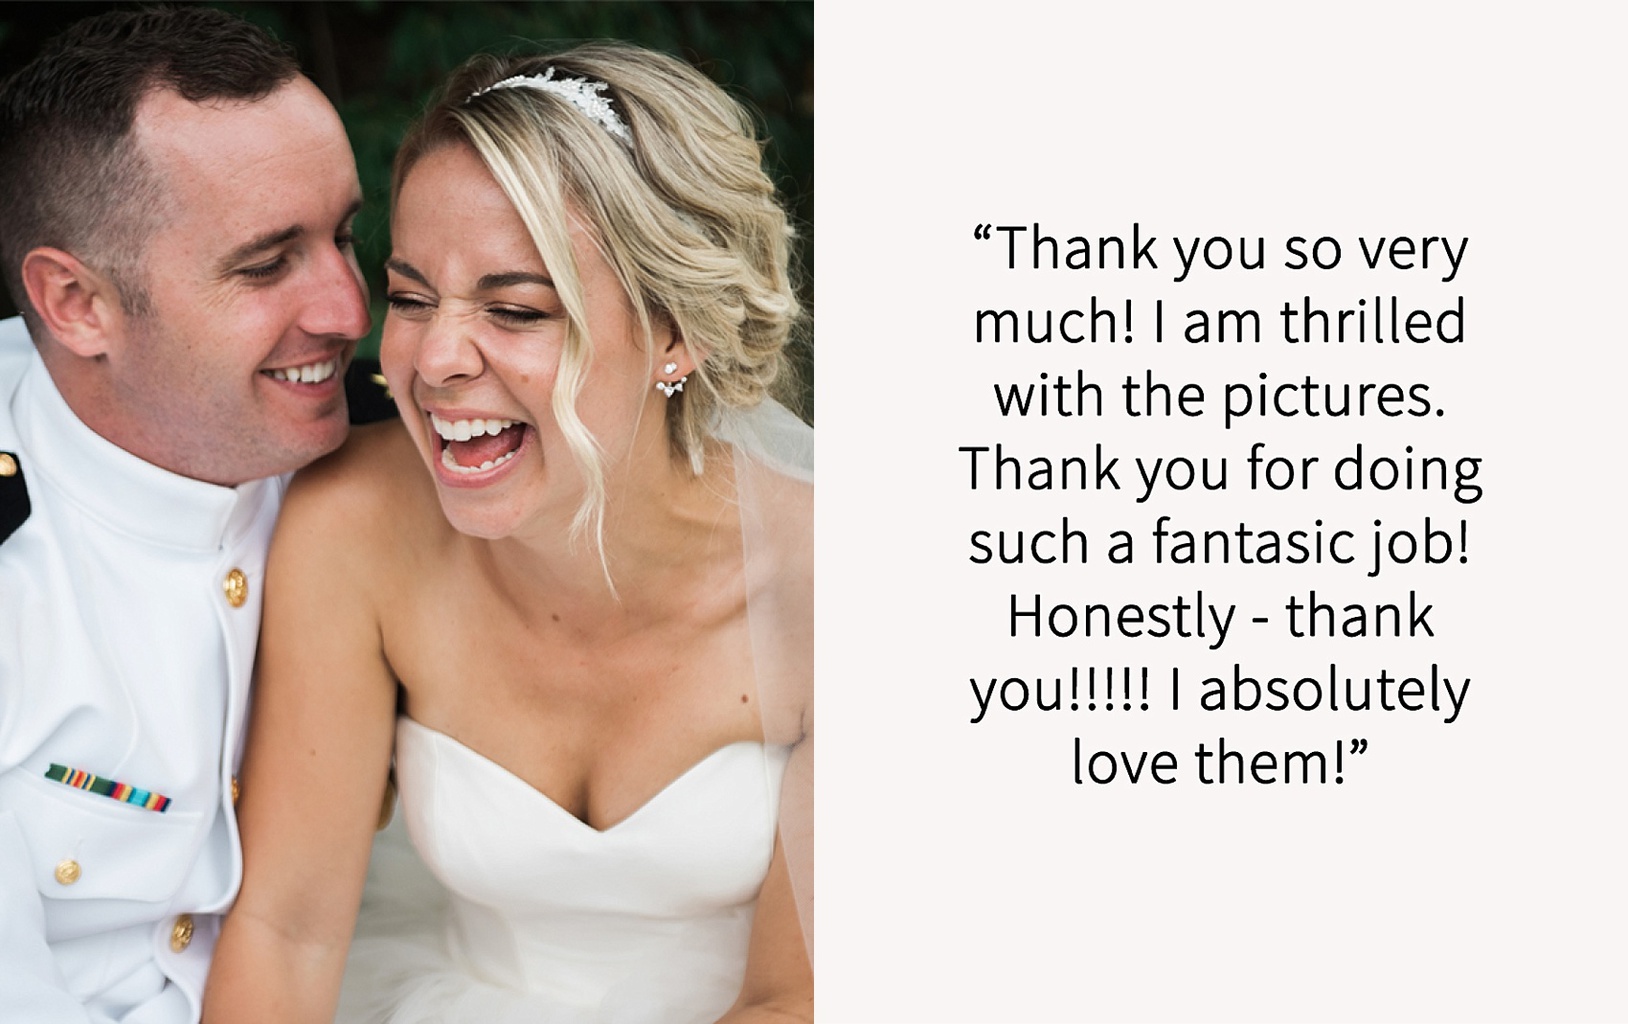 Photo: Kellogg Center wedding photos, quote: Thank you so very much! I am thrilled with the pictures. Thank you for doing such a fantastic job! Honestly - thank you!!!!! I absolutely love them!